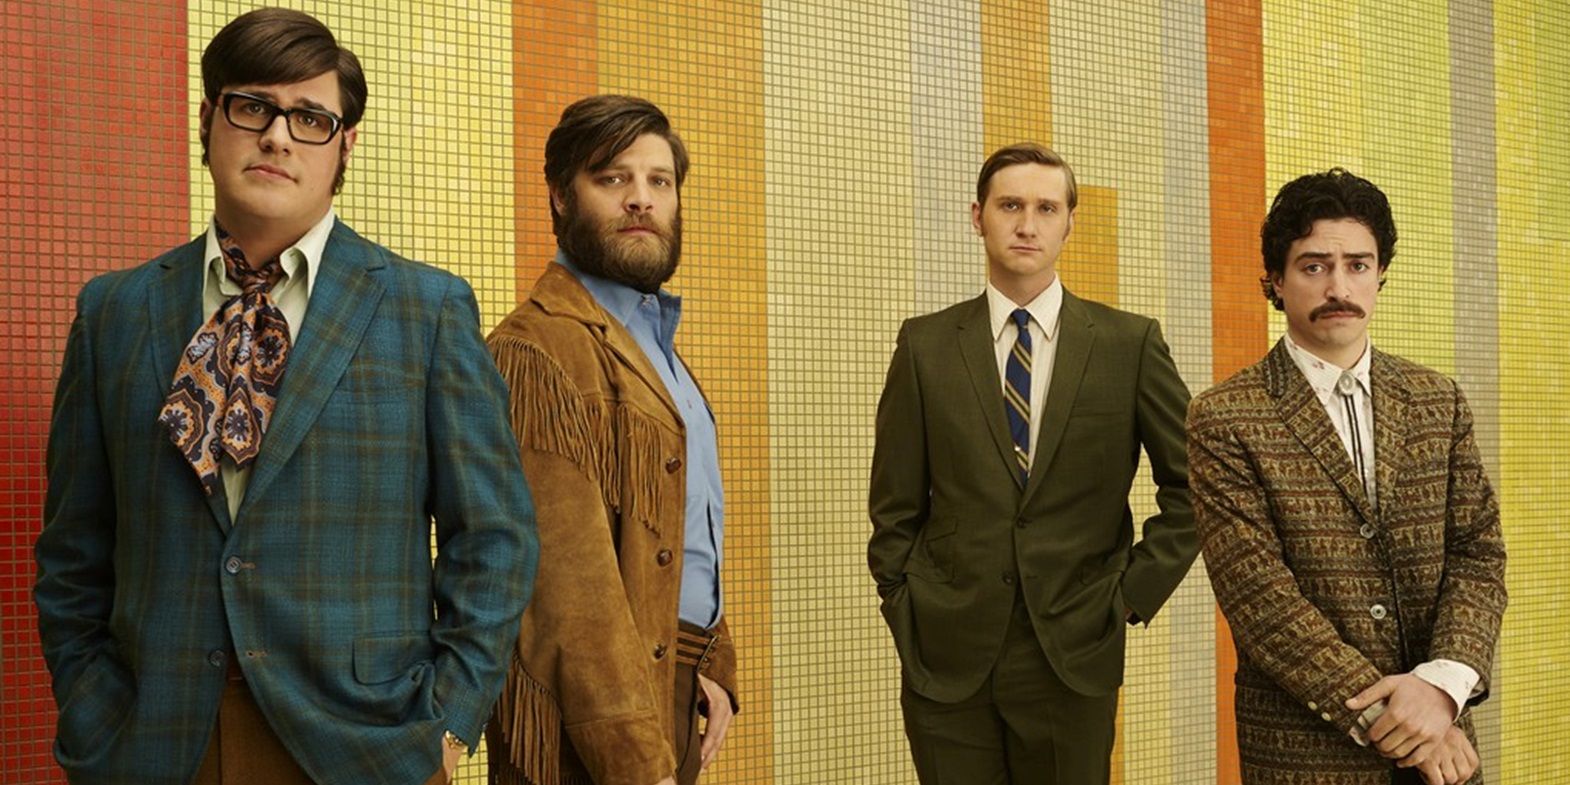 The supporting cast of Mad Men